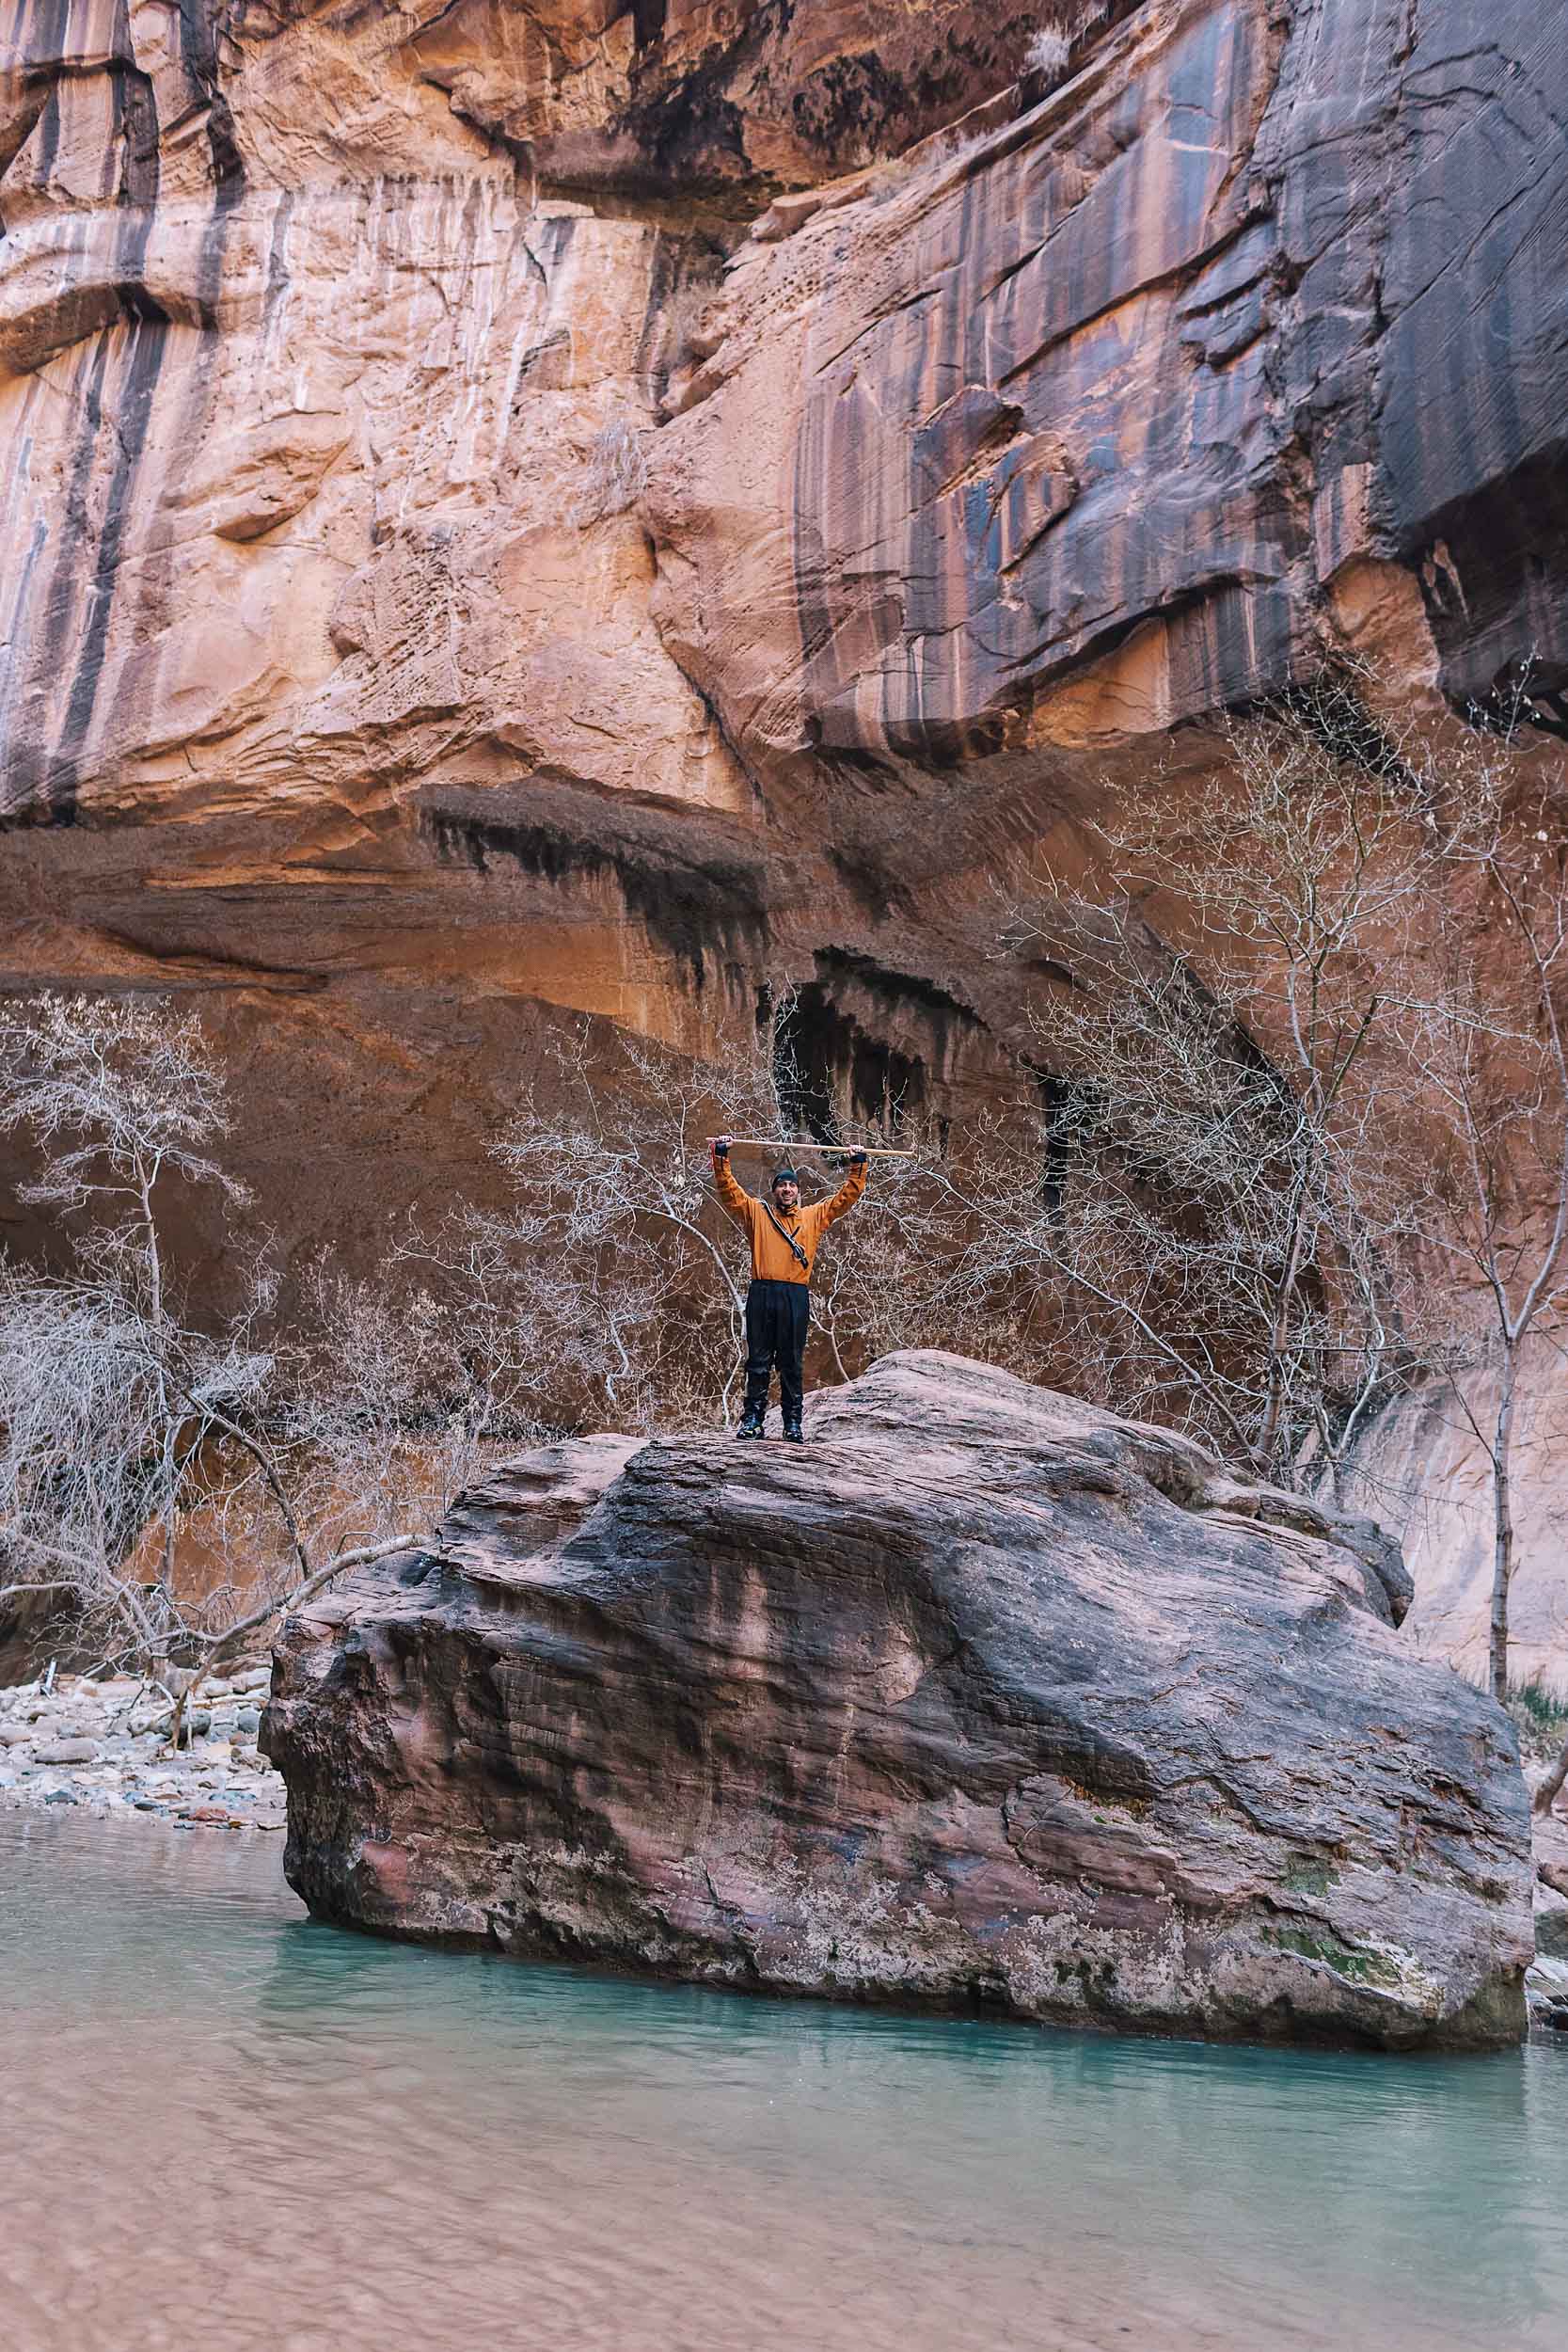 No crowds at Zion National Park during winter!  The best time to visit St. George